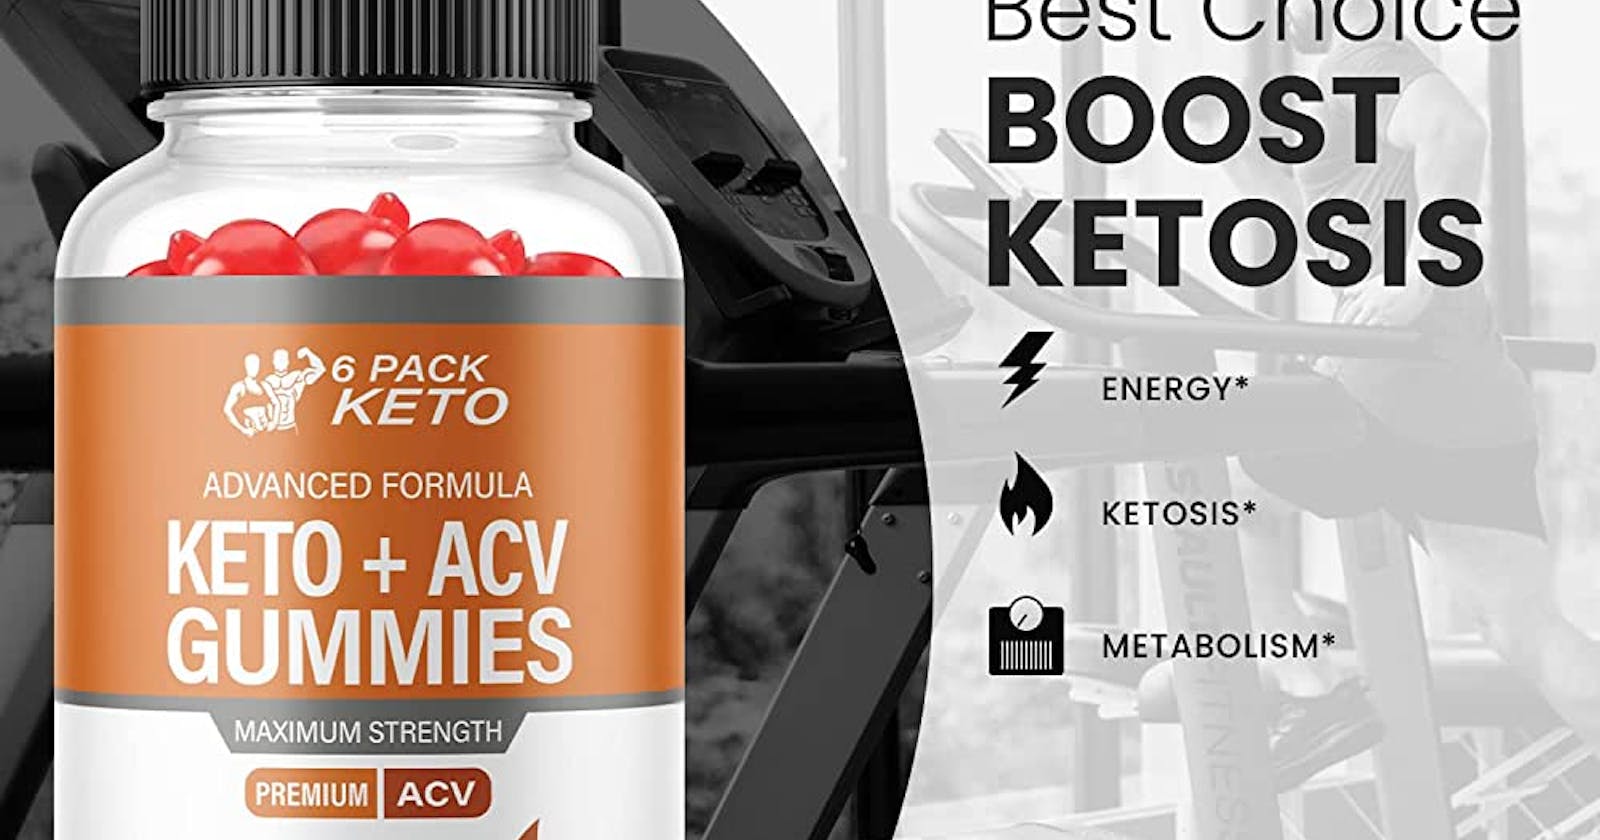 Find Good Fitness With 6 Pack Keto ACV Gummies!